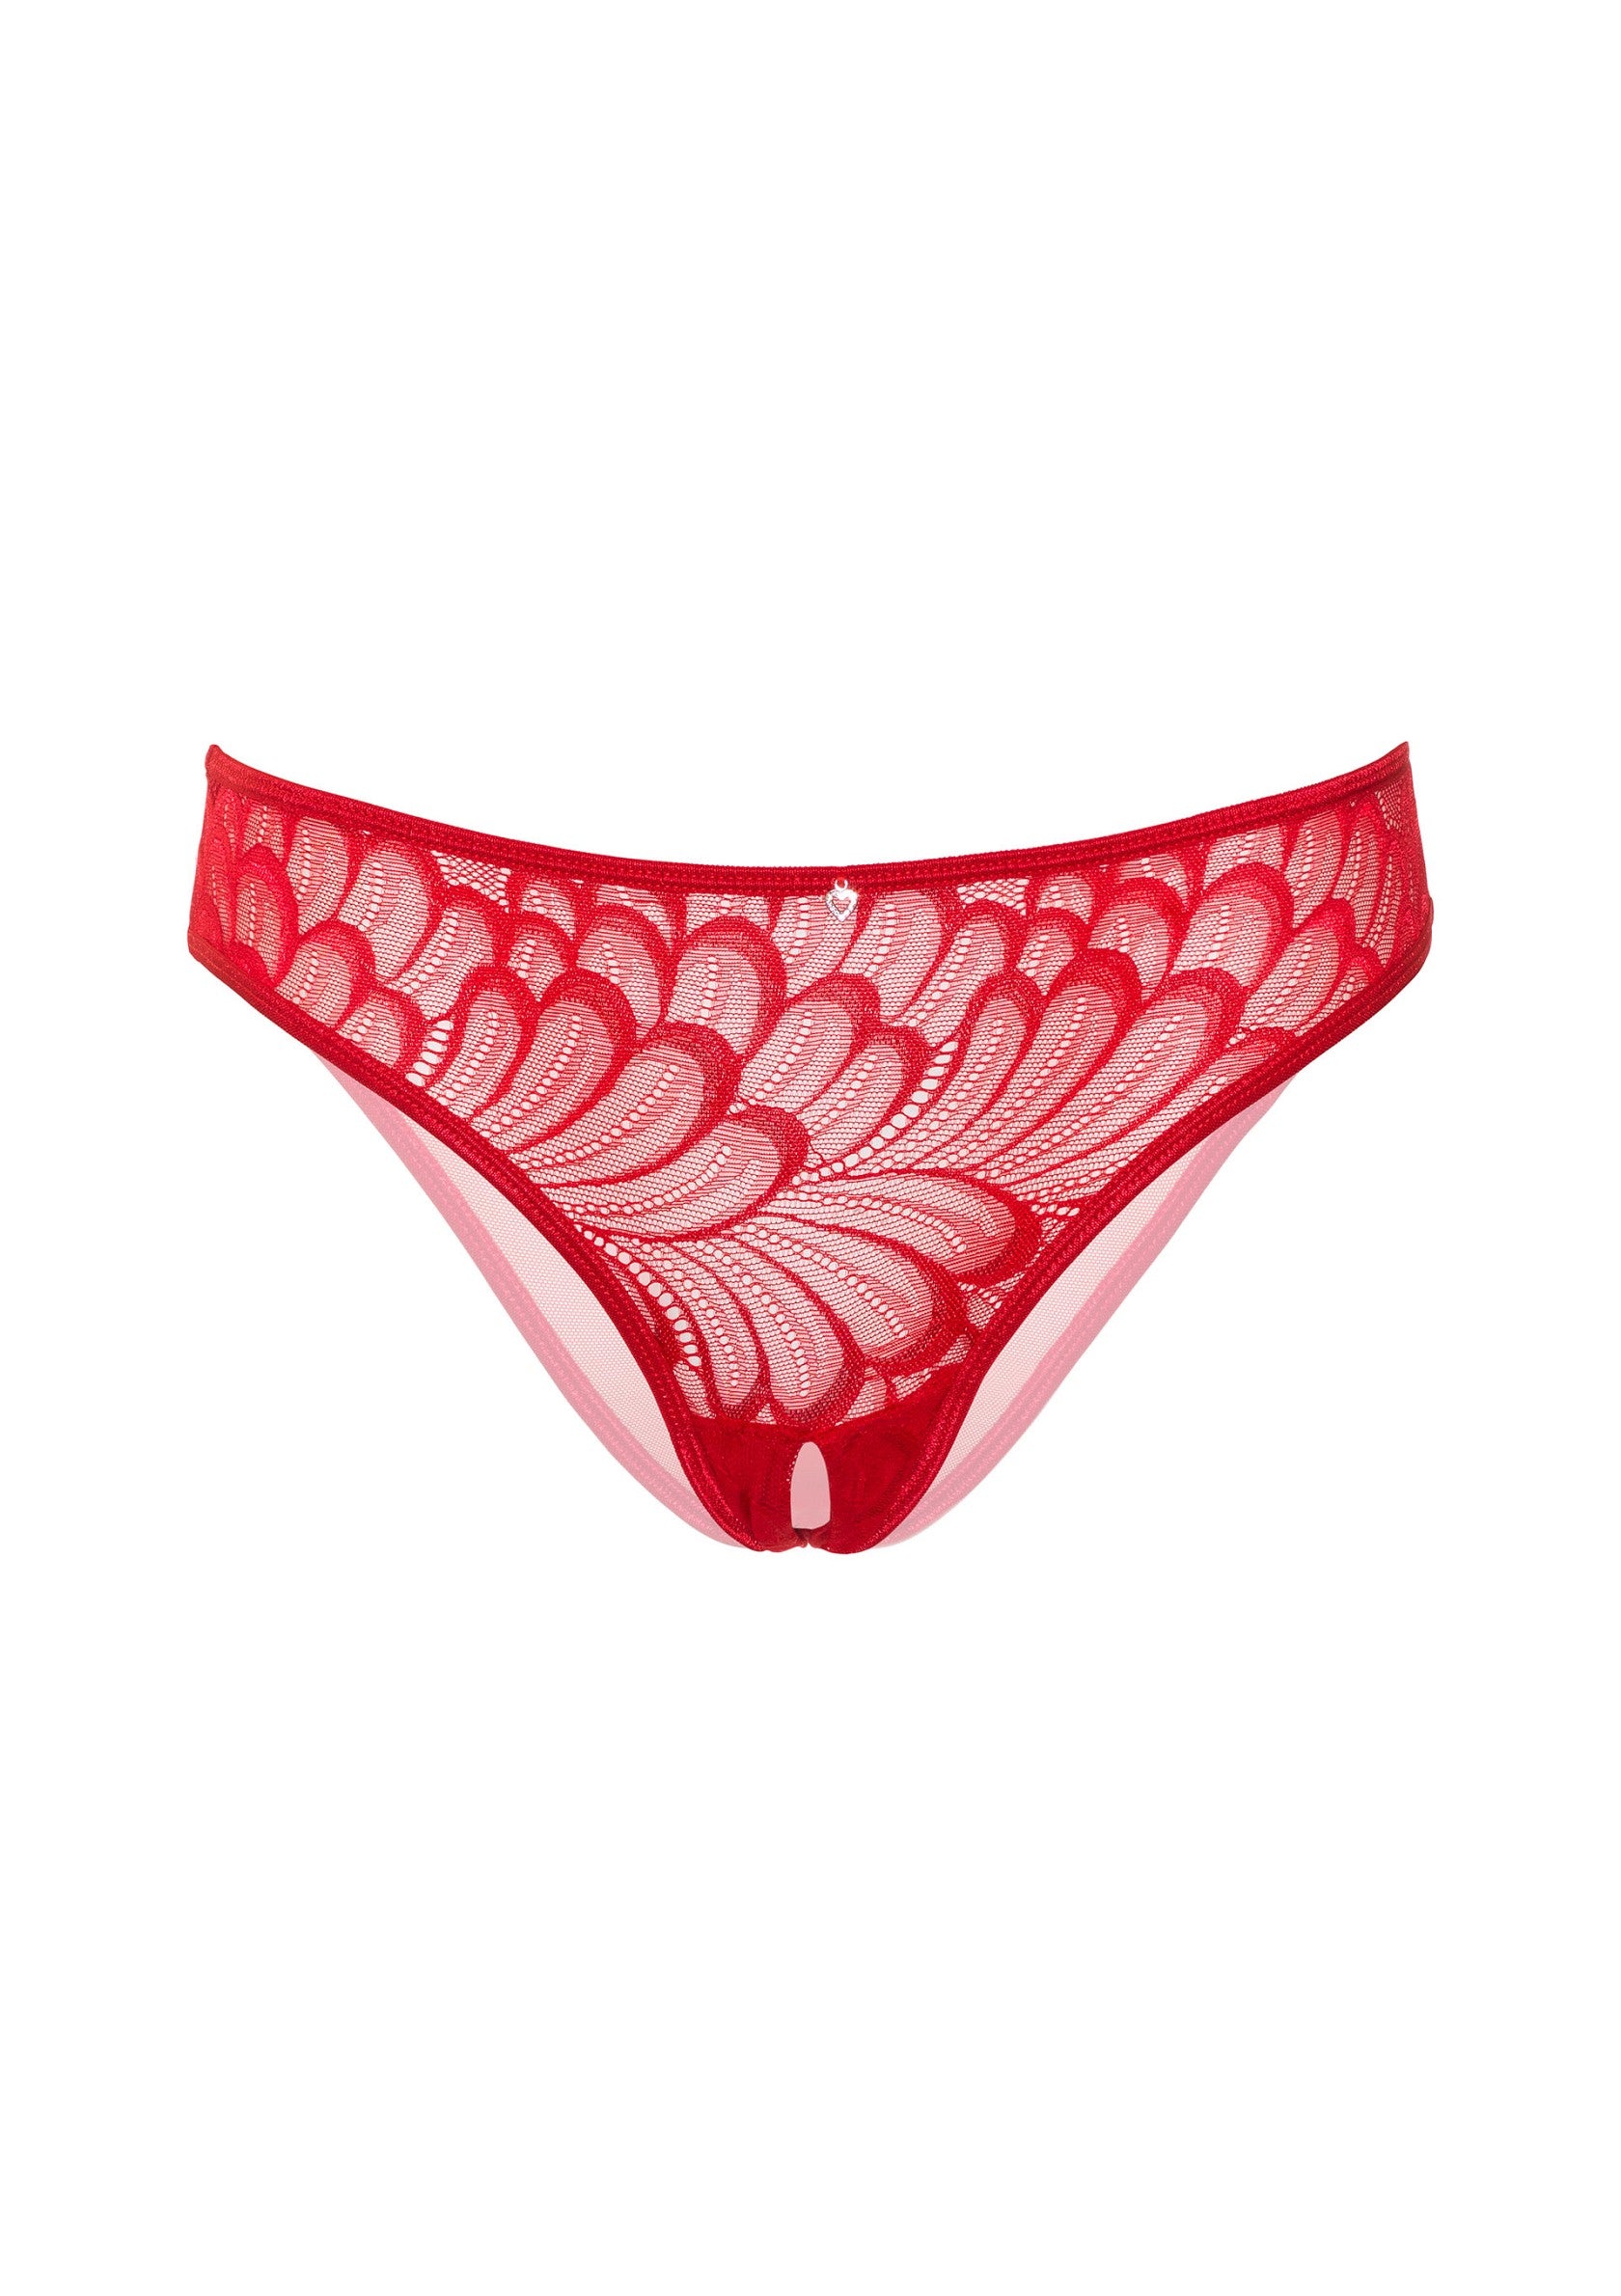 Daring Intimates Mix & Match Crotchless Hiphugger RED S/M - 6